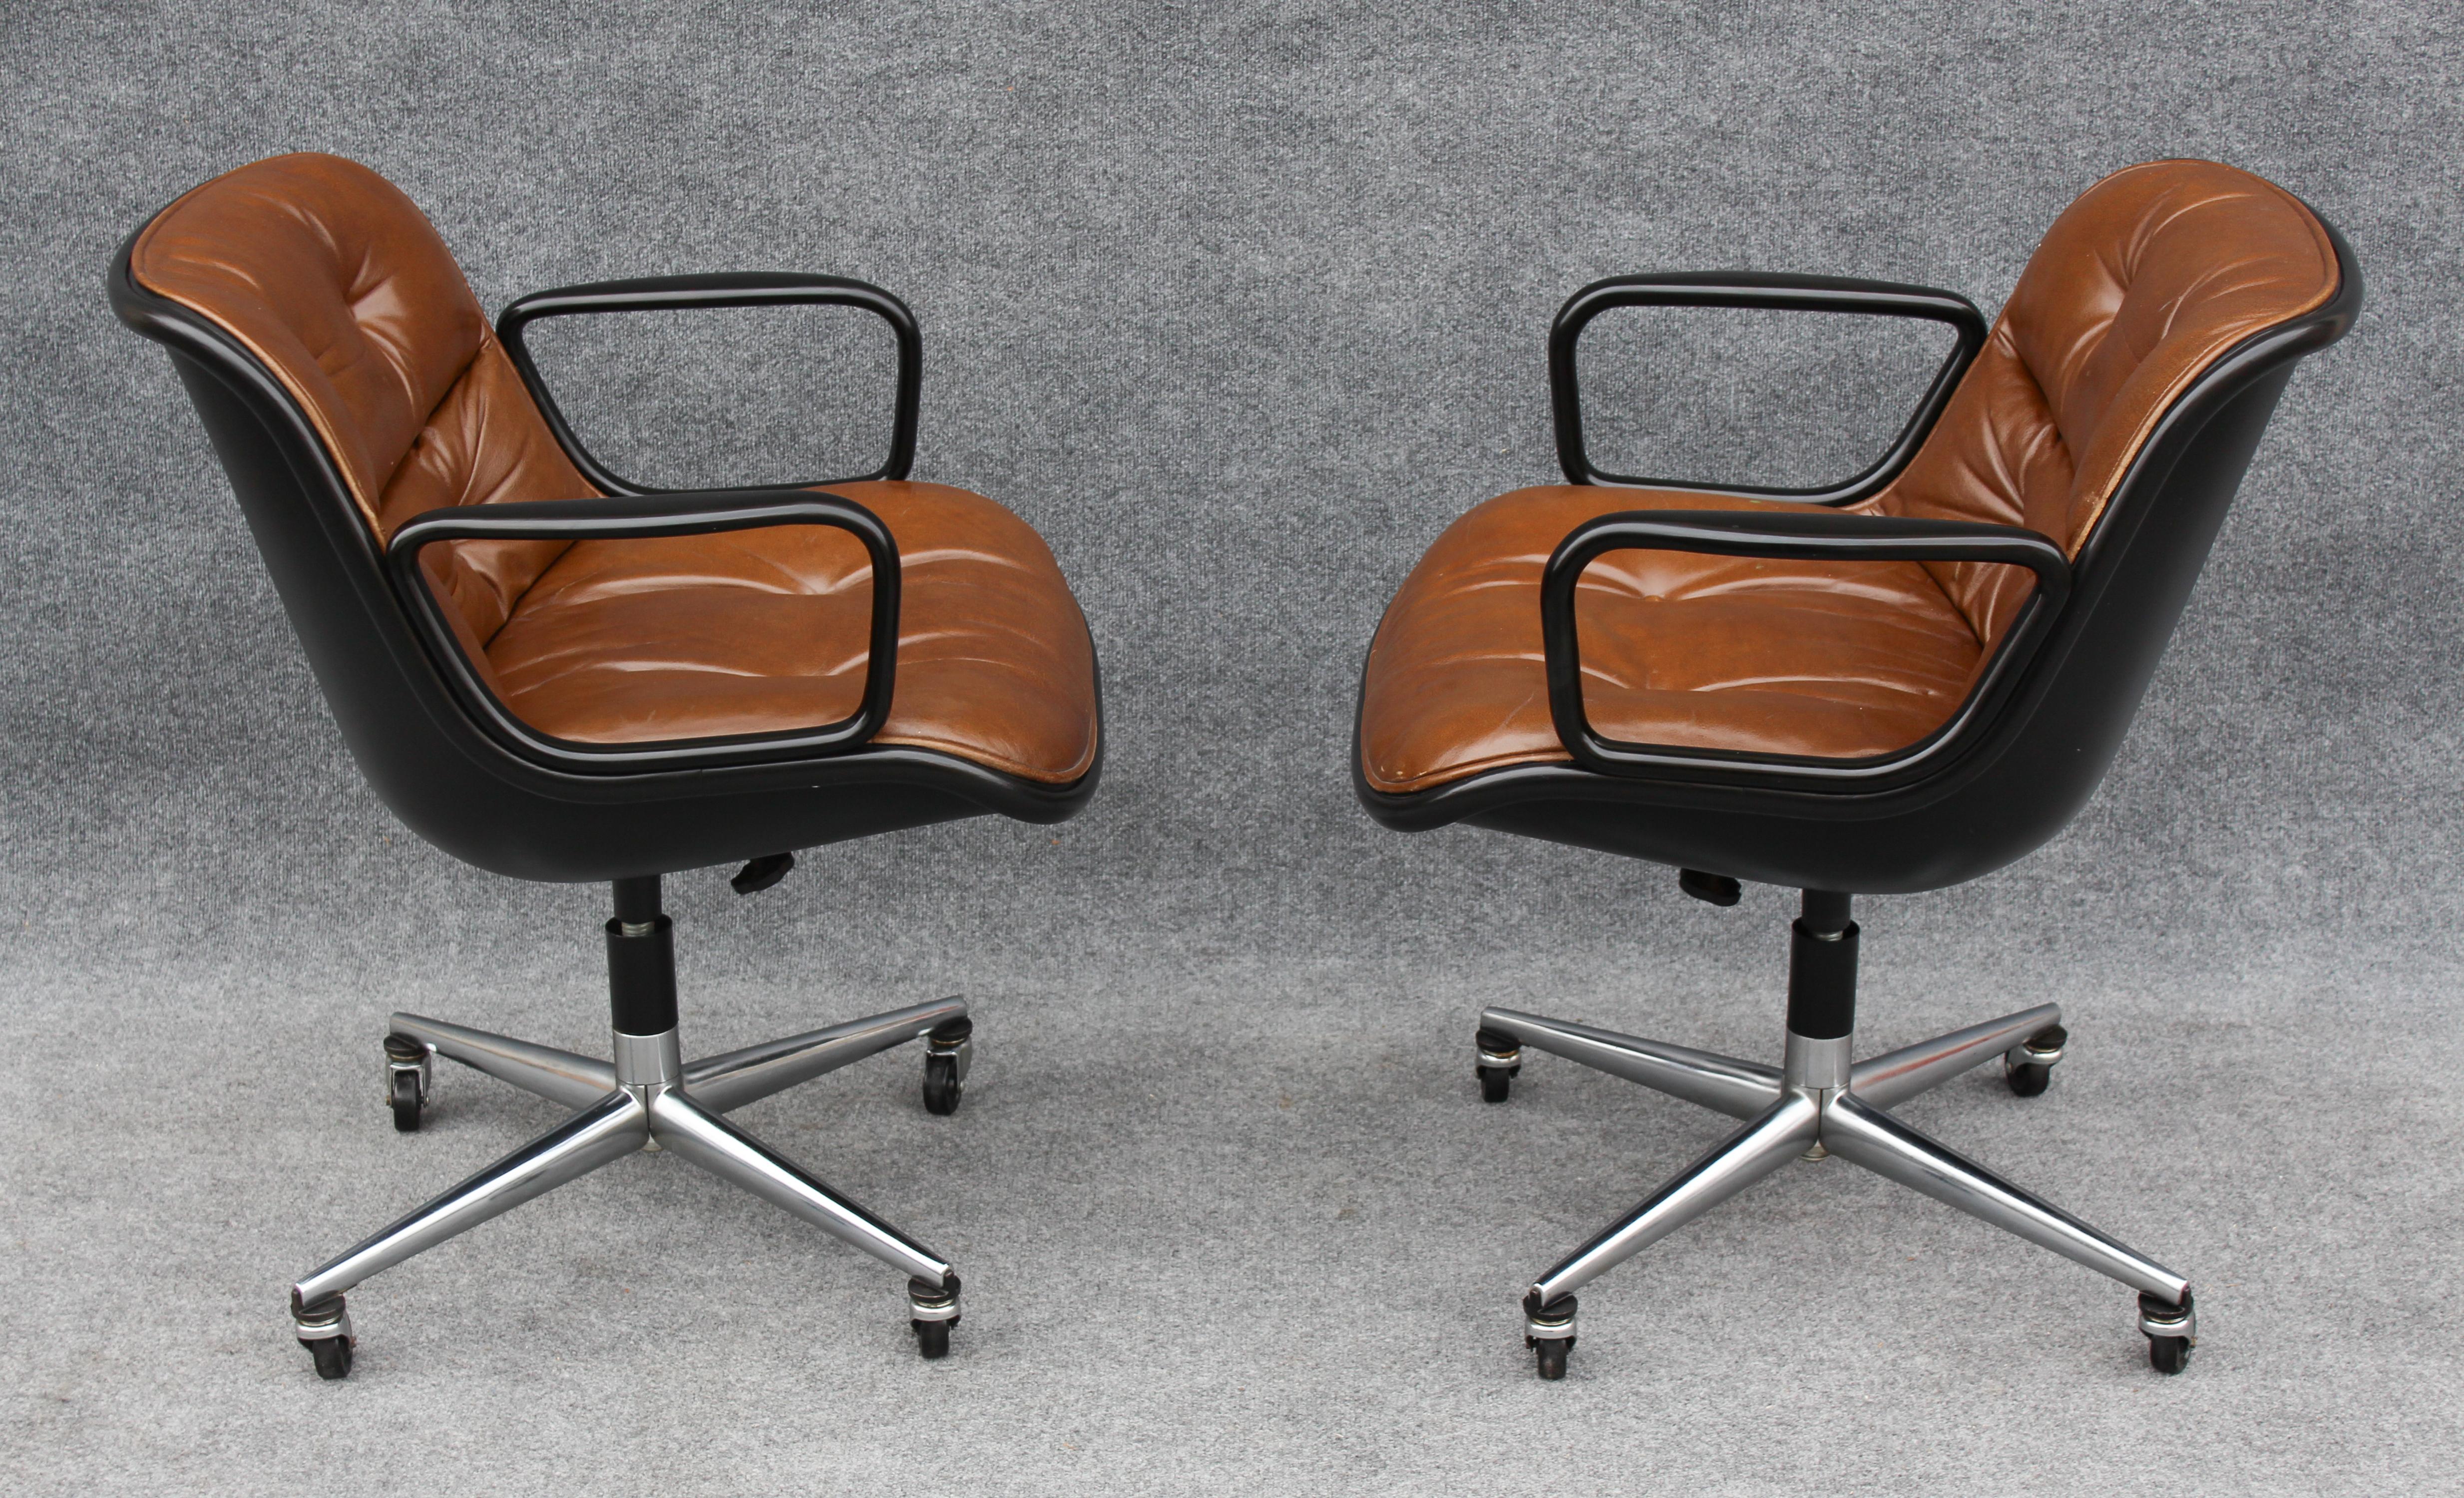 Late 20th Century Pair of Charles Pollock for Knoll Arm or Desk Chairs in Brown Leather & Black